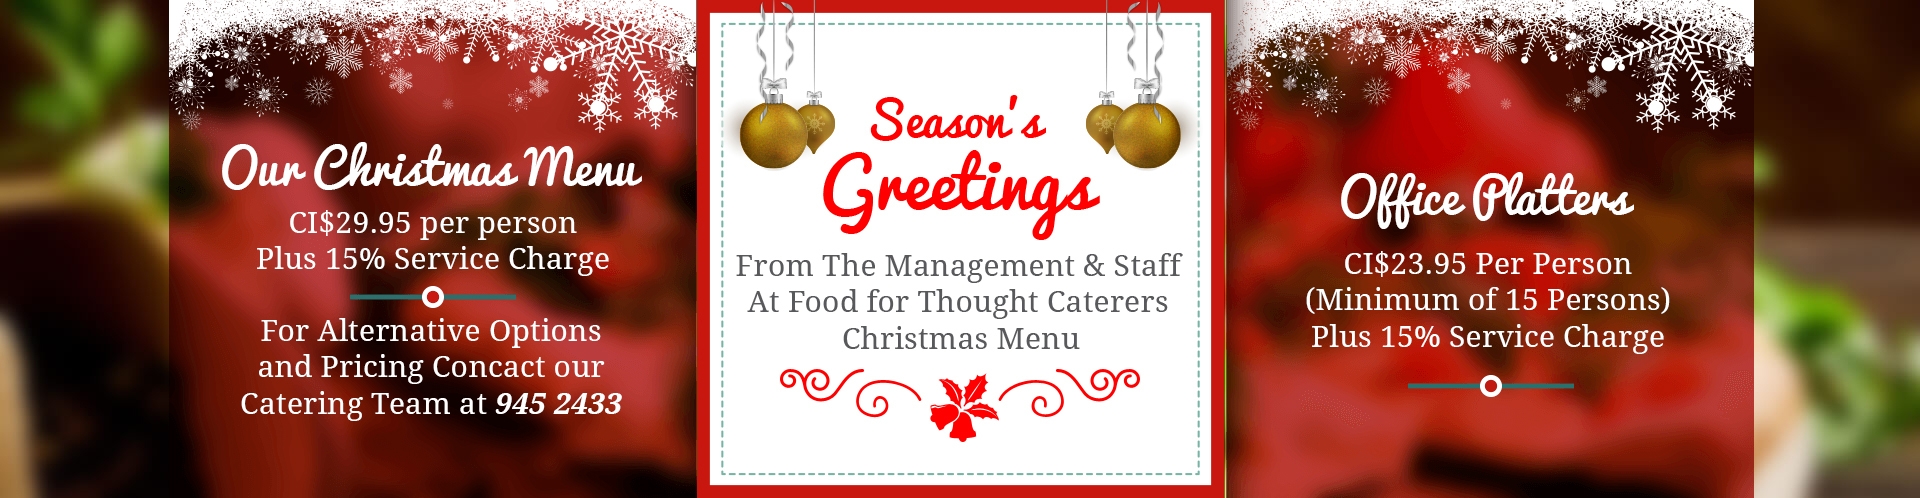 Professional Catering Services - Food For Thought